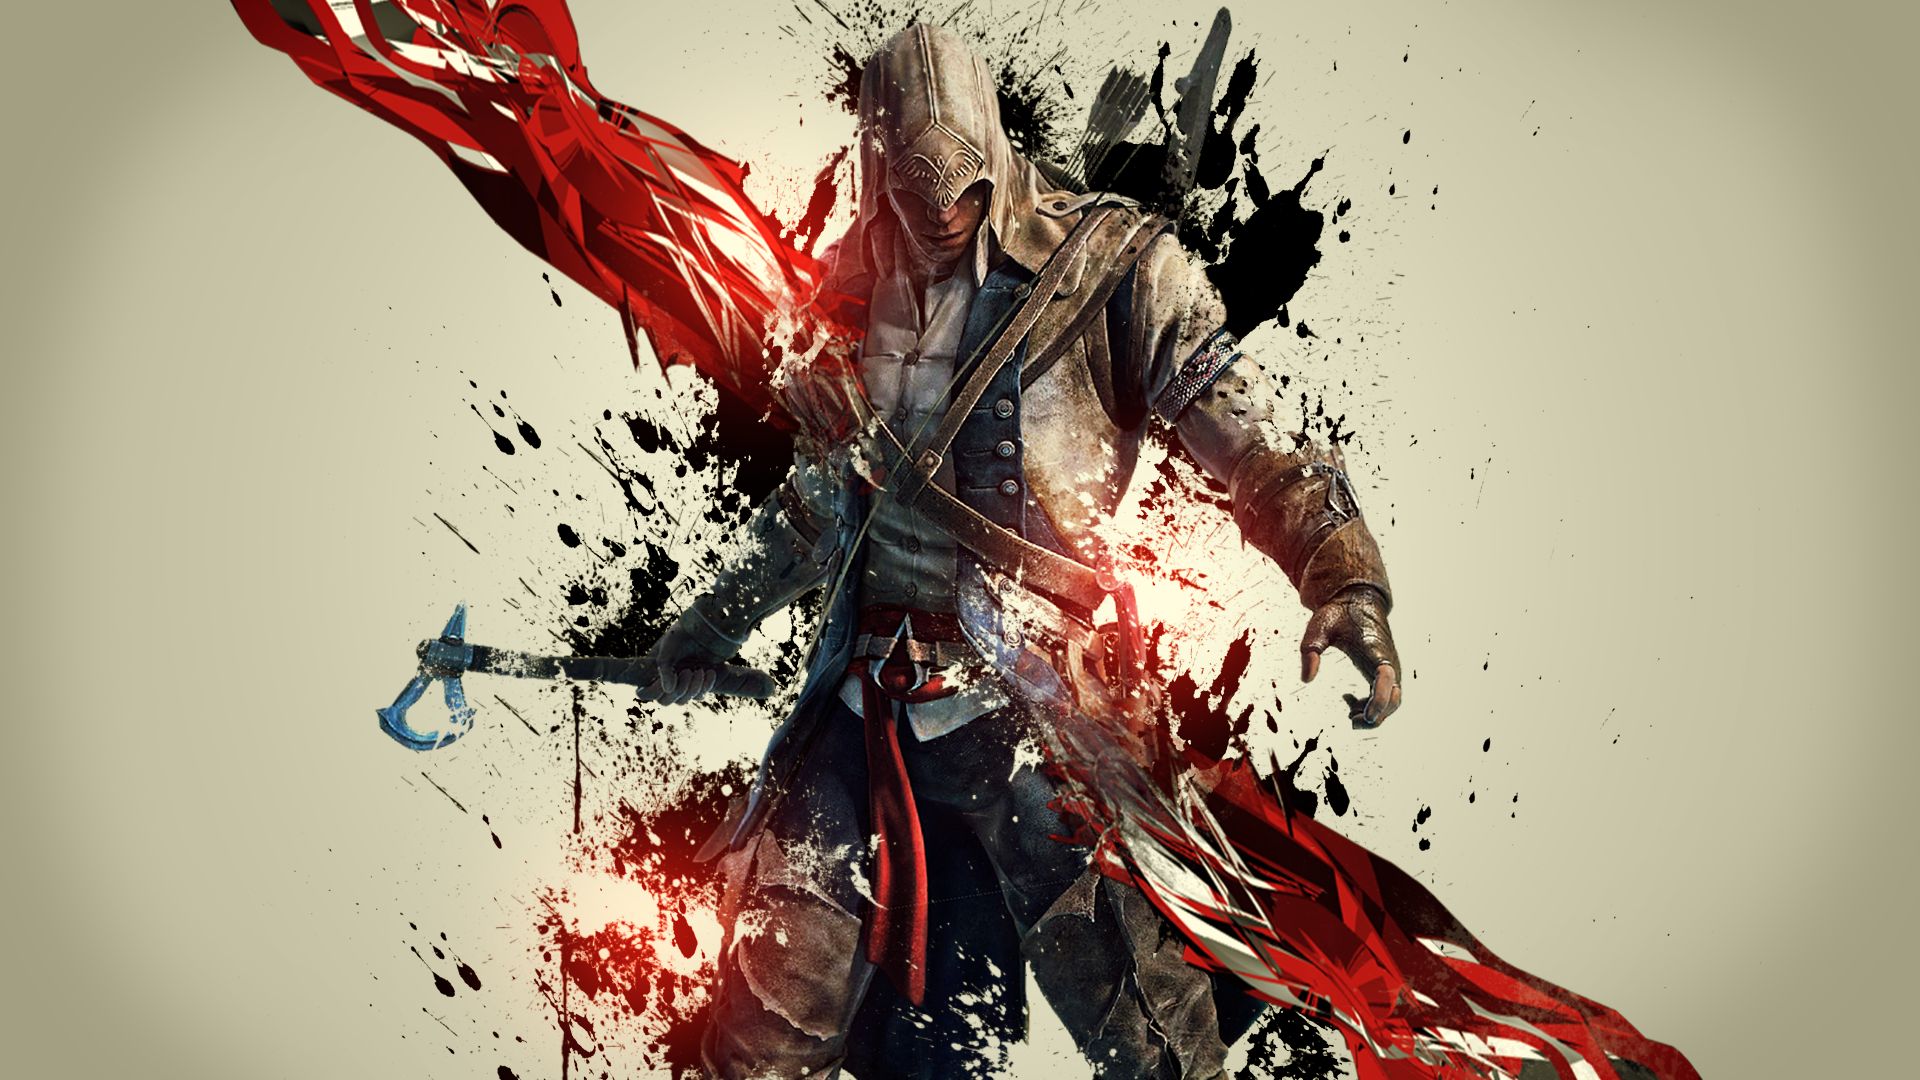 video game, warrior, connor (assassin's creed), assassin's creed, assassin's creed iii Full HD